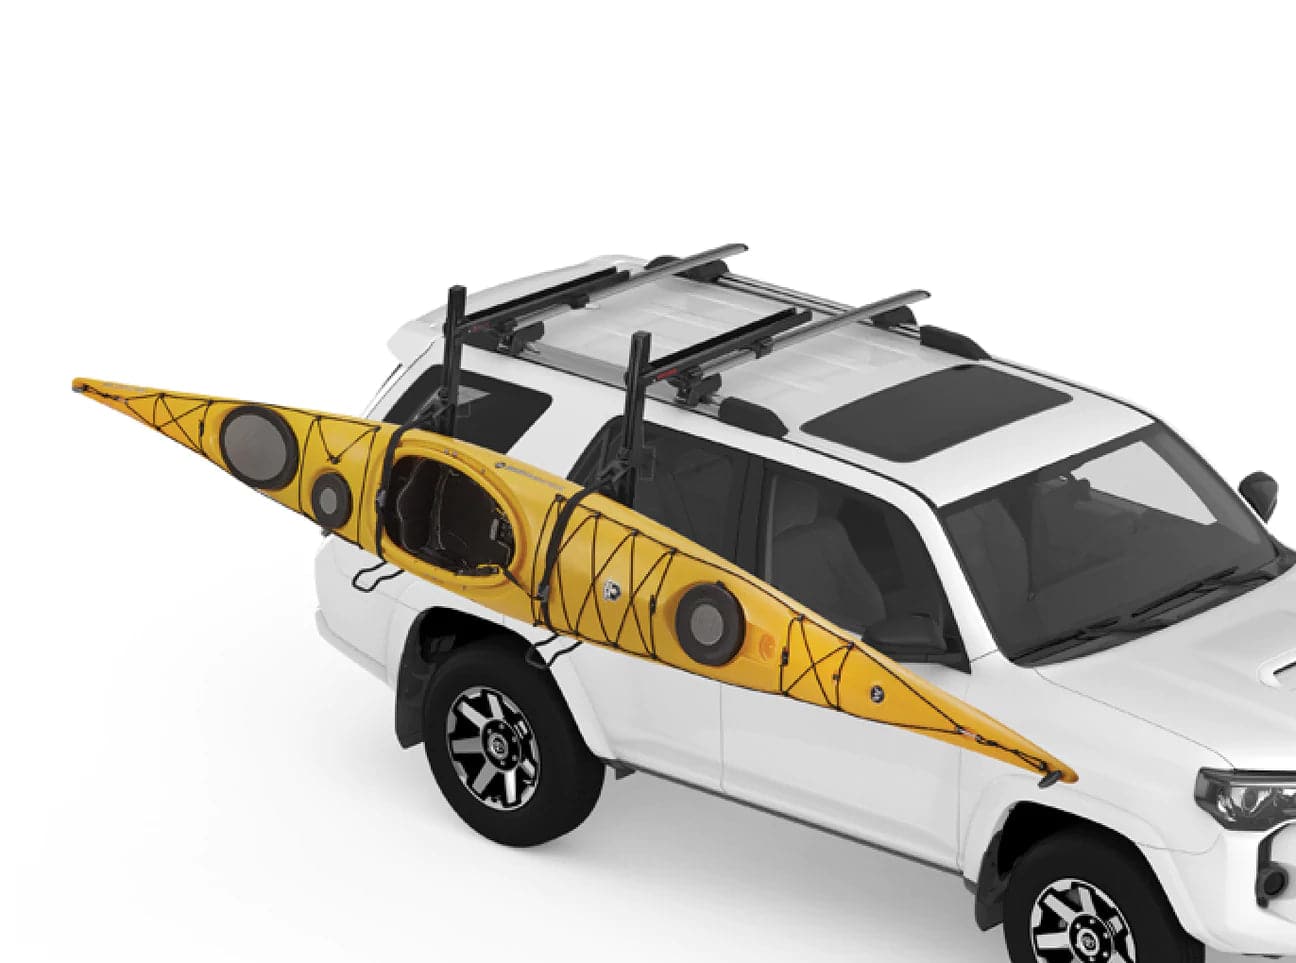 Featuring the ShowDown rec kayak accessory, tour kayak accessory, transport, water mount manufactured by Yakima shown here from a second angle.